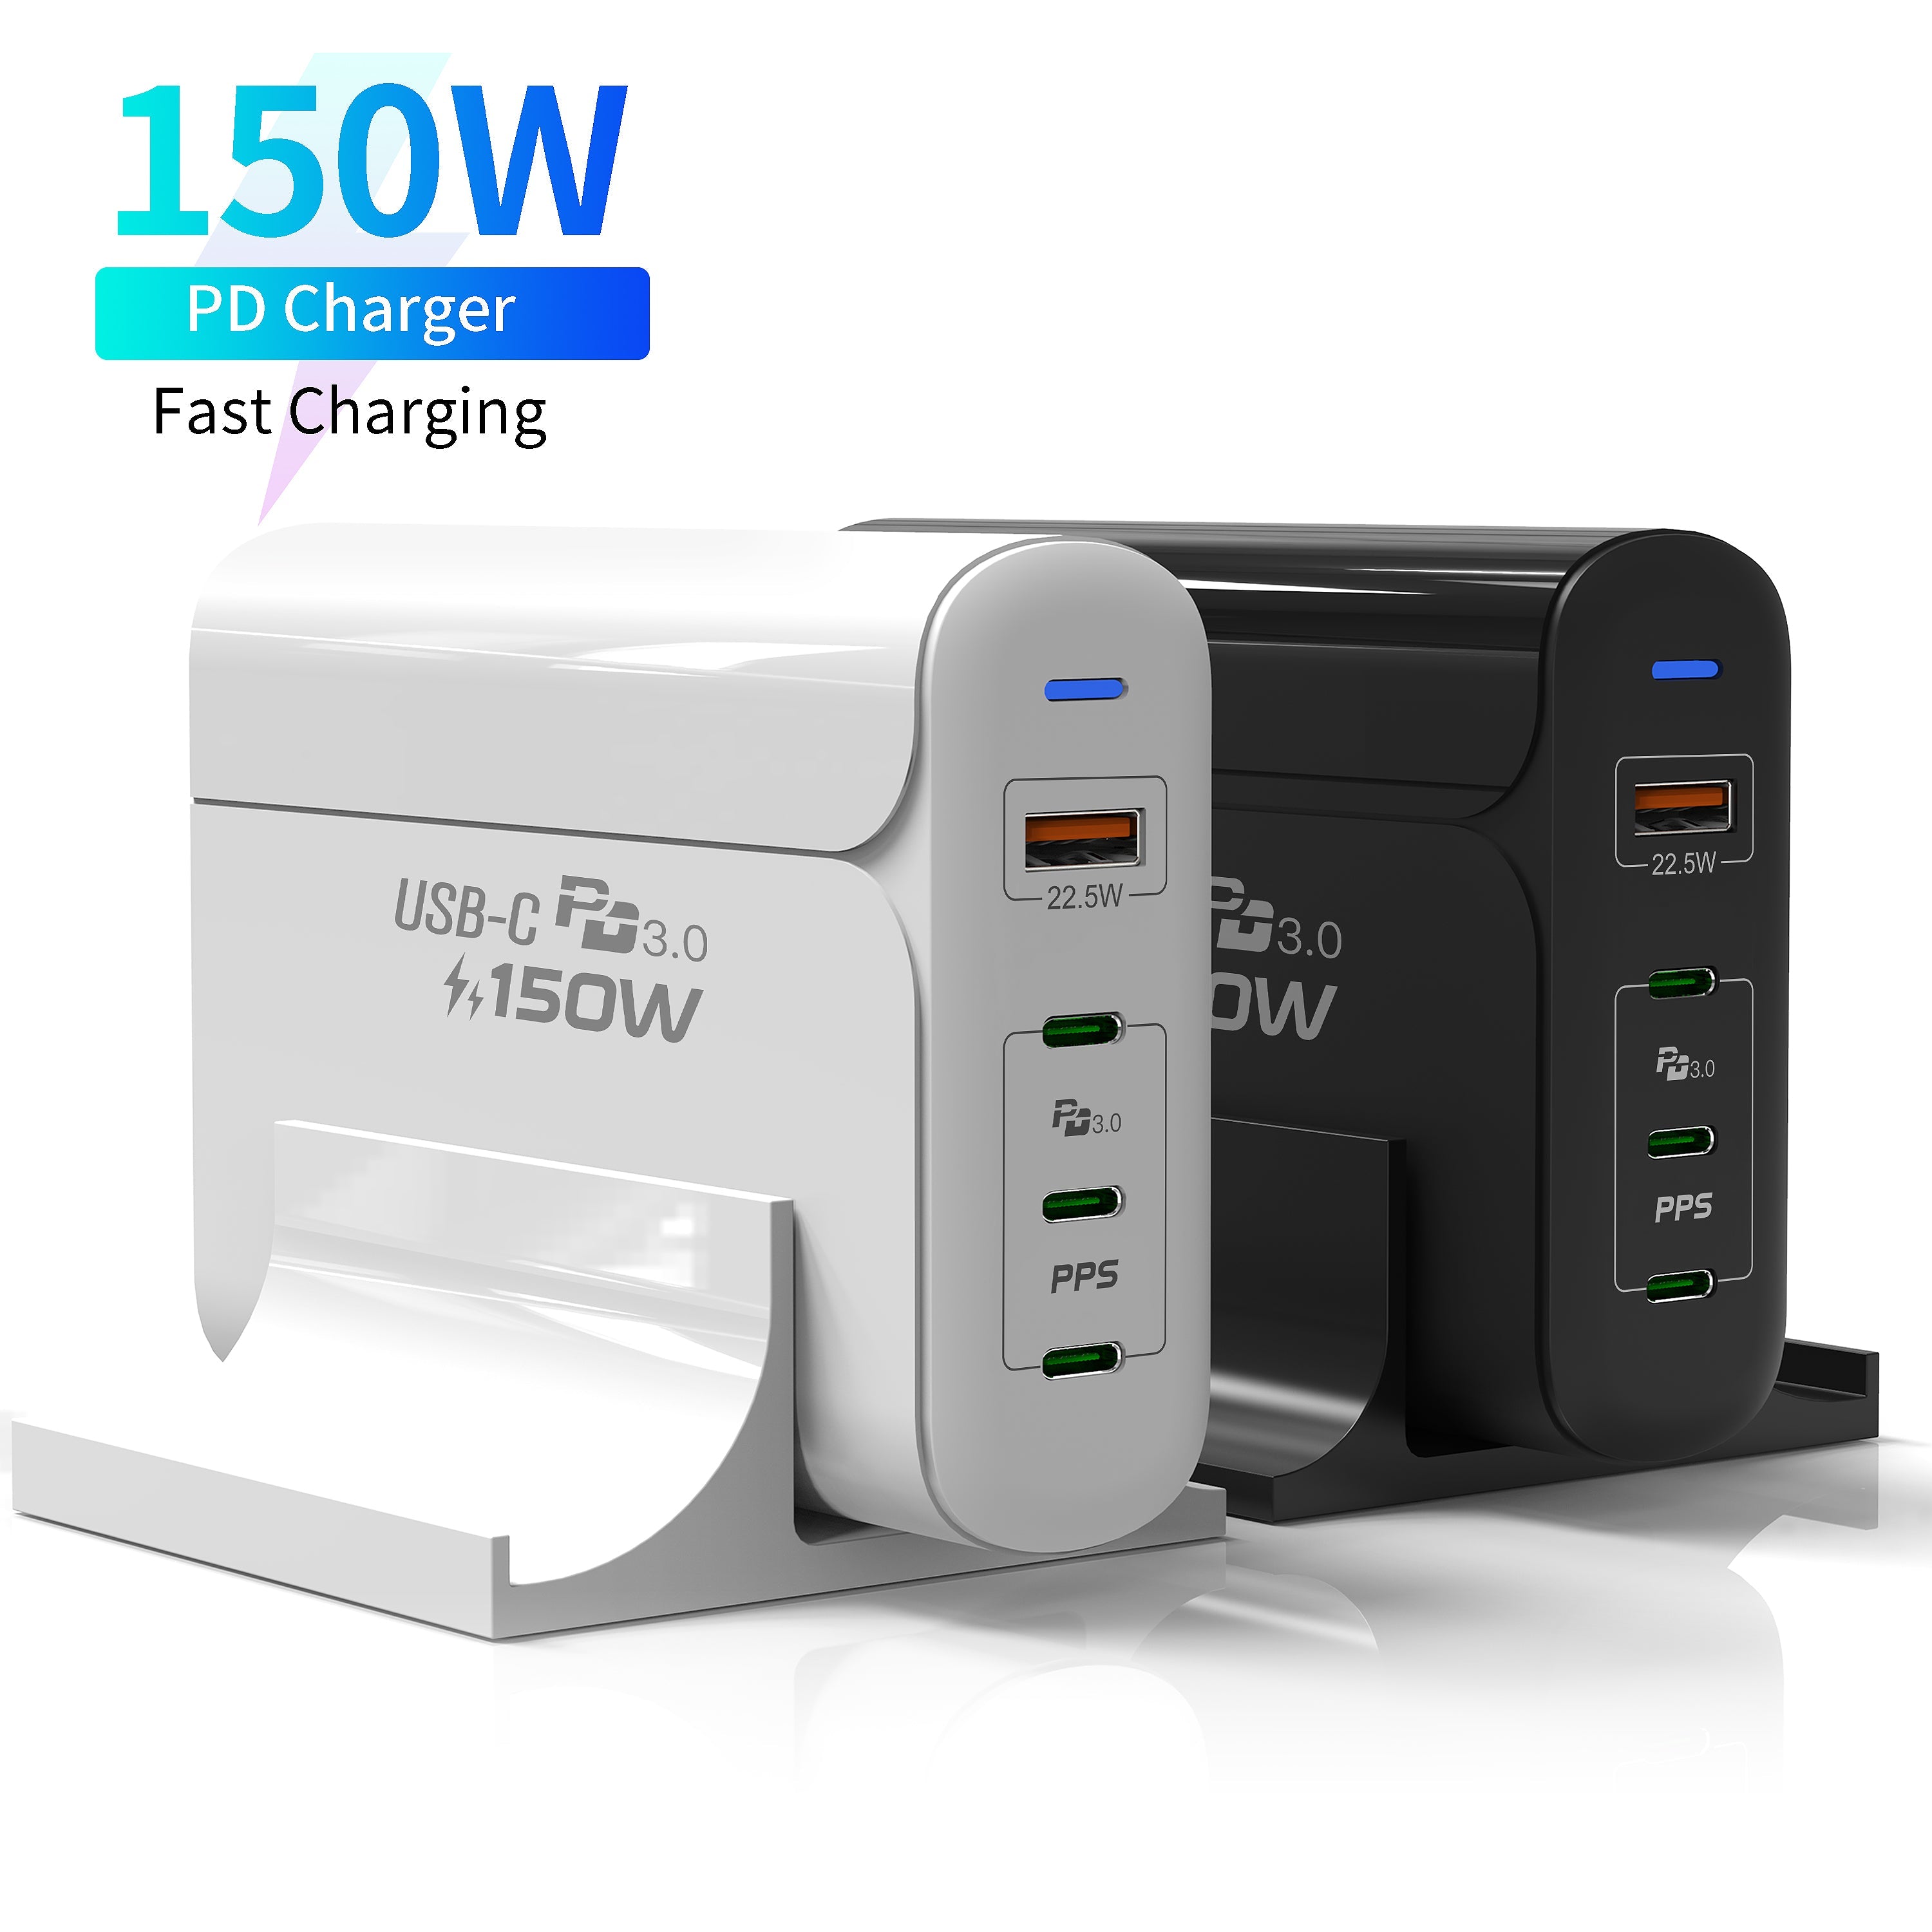 HUNDA 2020 Best Selling New Technology 150W PD3.0 QC4 PPS Fast Charging USB Type C Computer Home Charger Adapter for Dell for Ap | Electrr Inc